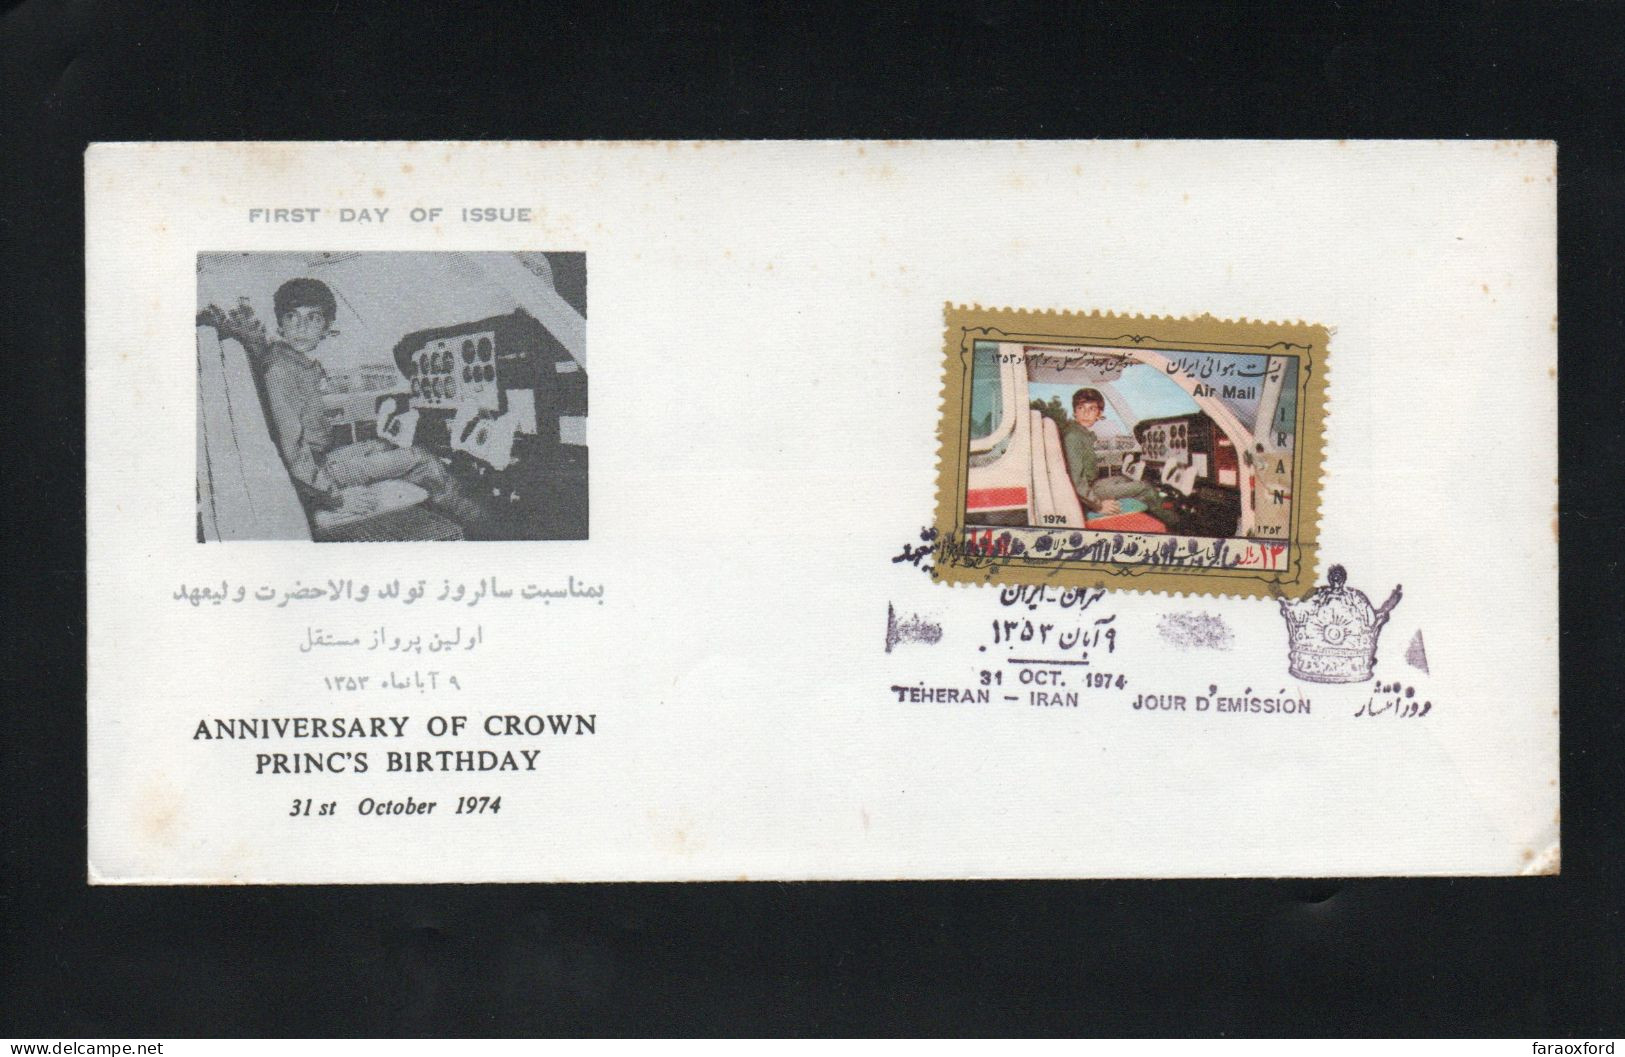 IRAN - ايران - PERSIA - 1974 - CROWN PRINCE'S BIRTHDAY - FIRST DAY COVER - SPECIAL TEHERAN POSTMARK - Iran